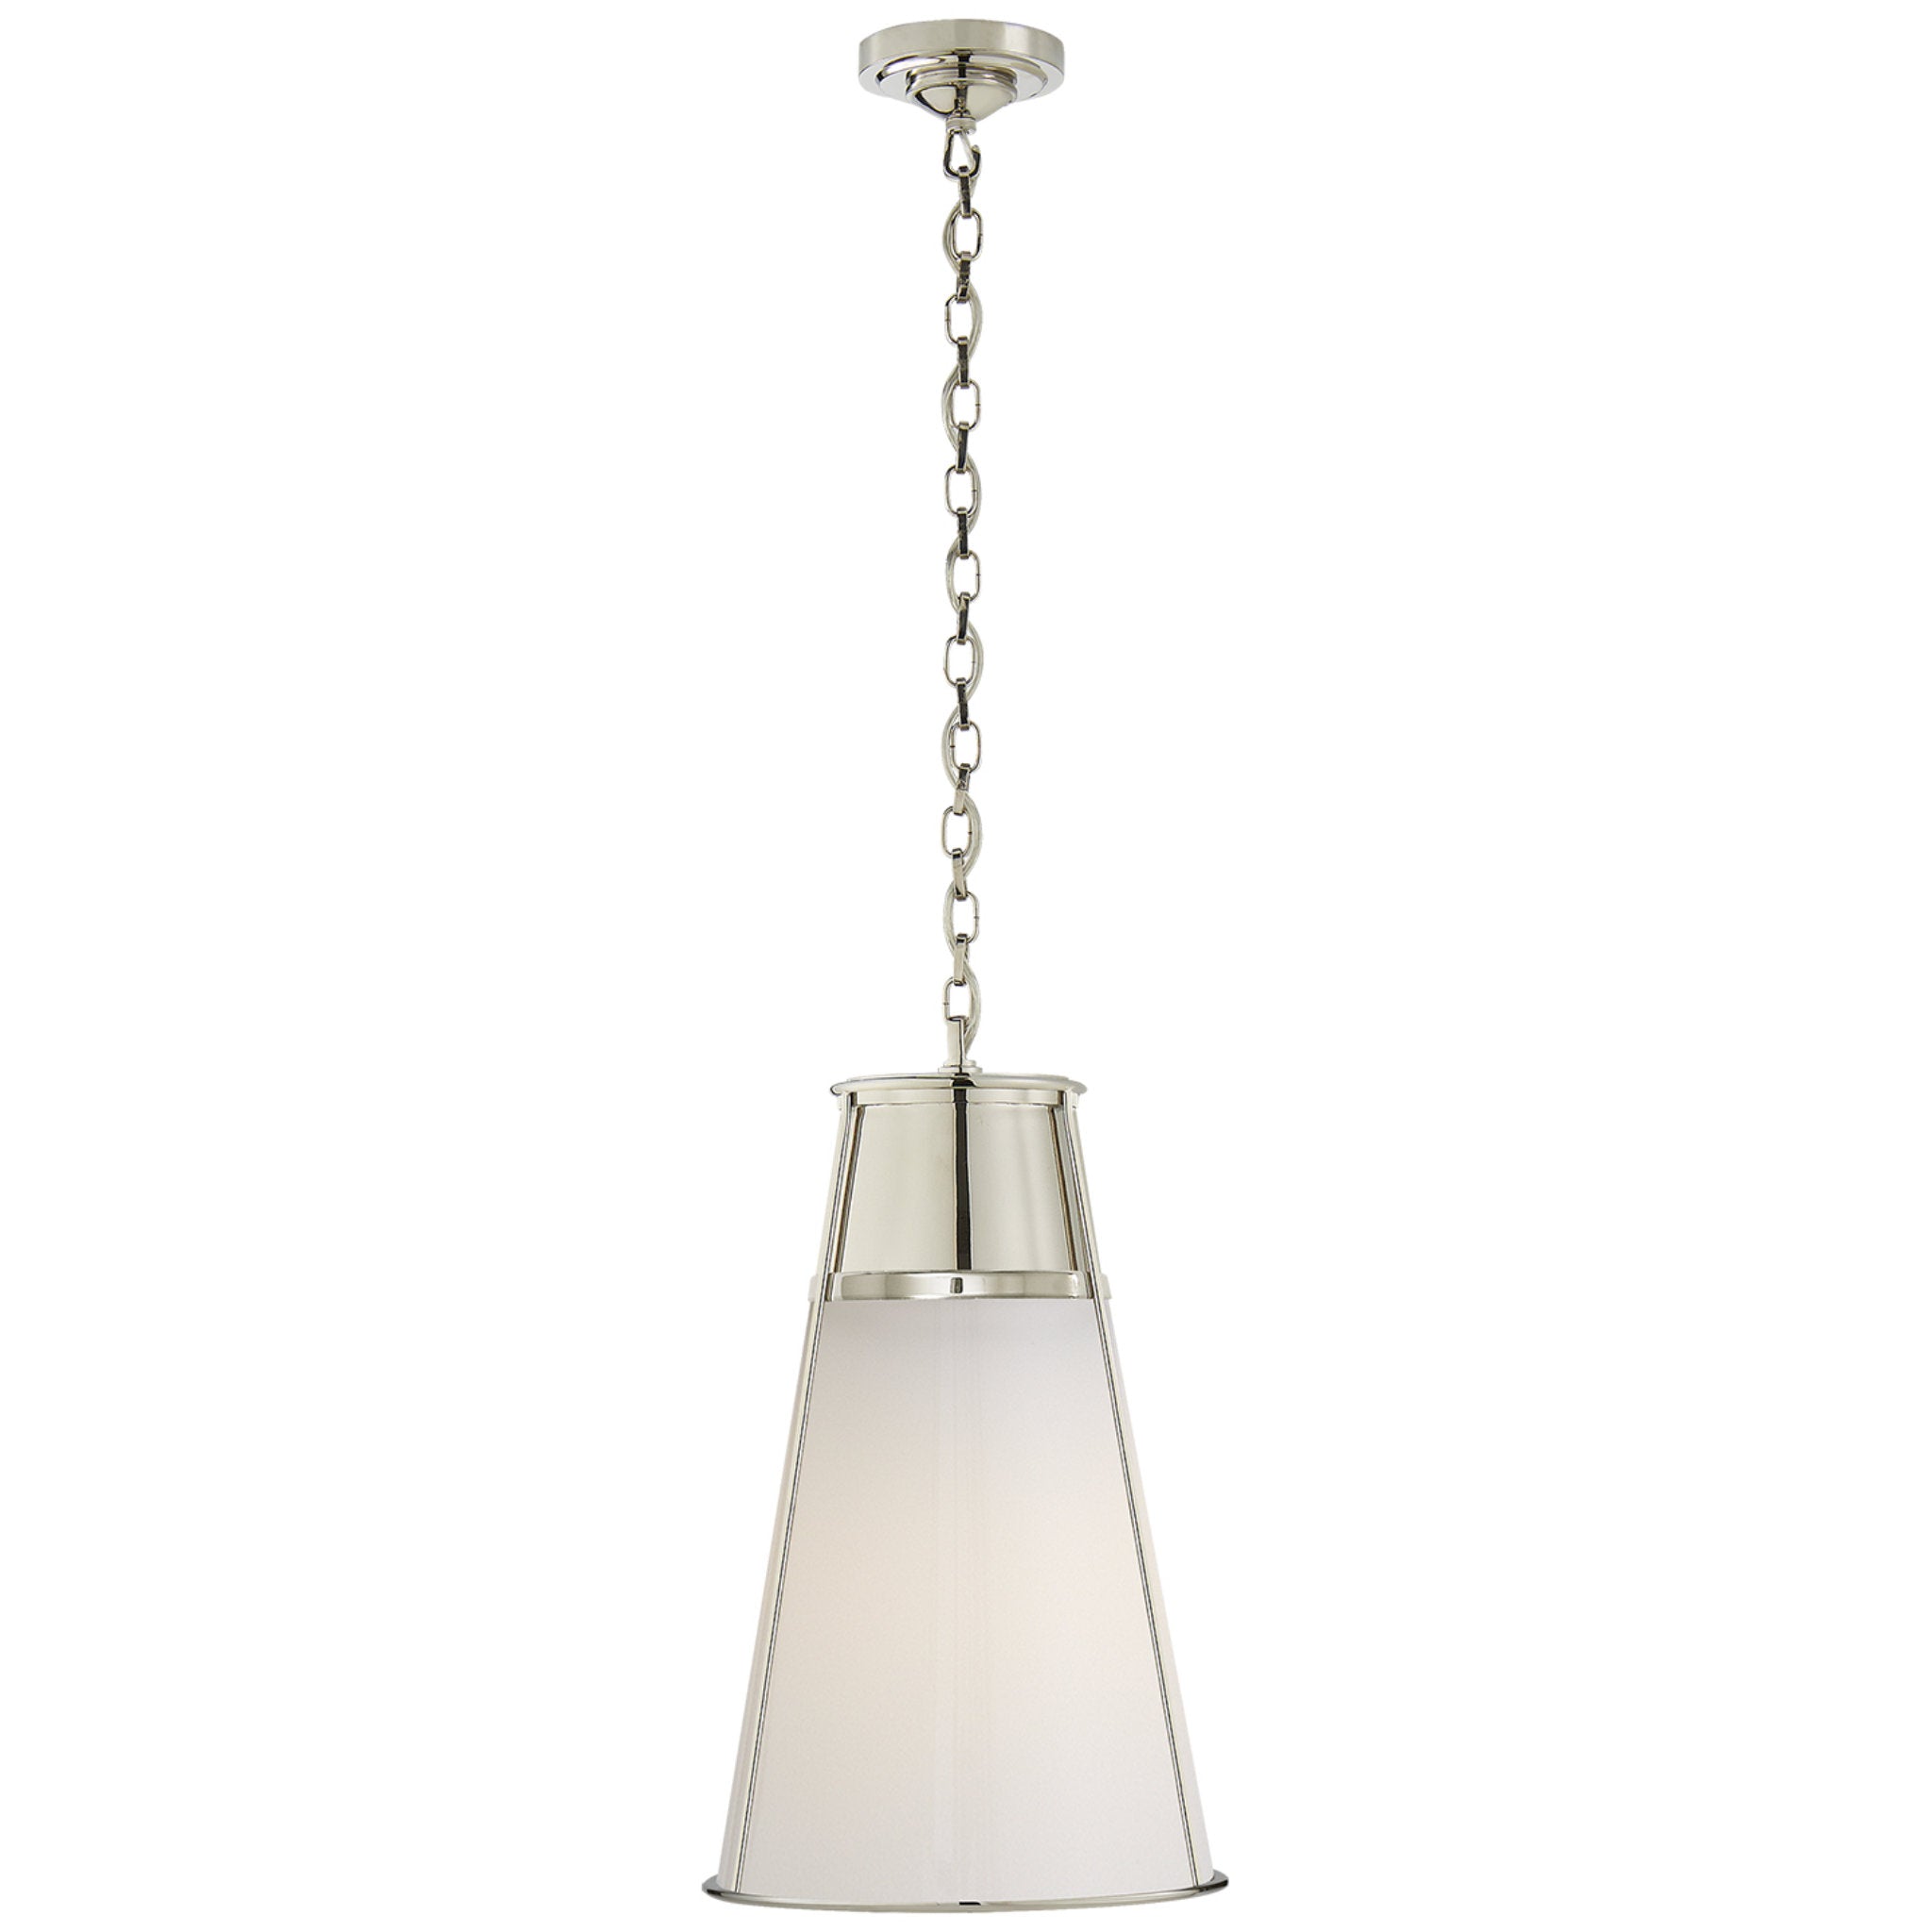 Thomas O'Brien Robinson Large Pendant in Polished Nickel with White Glass